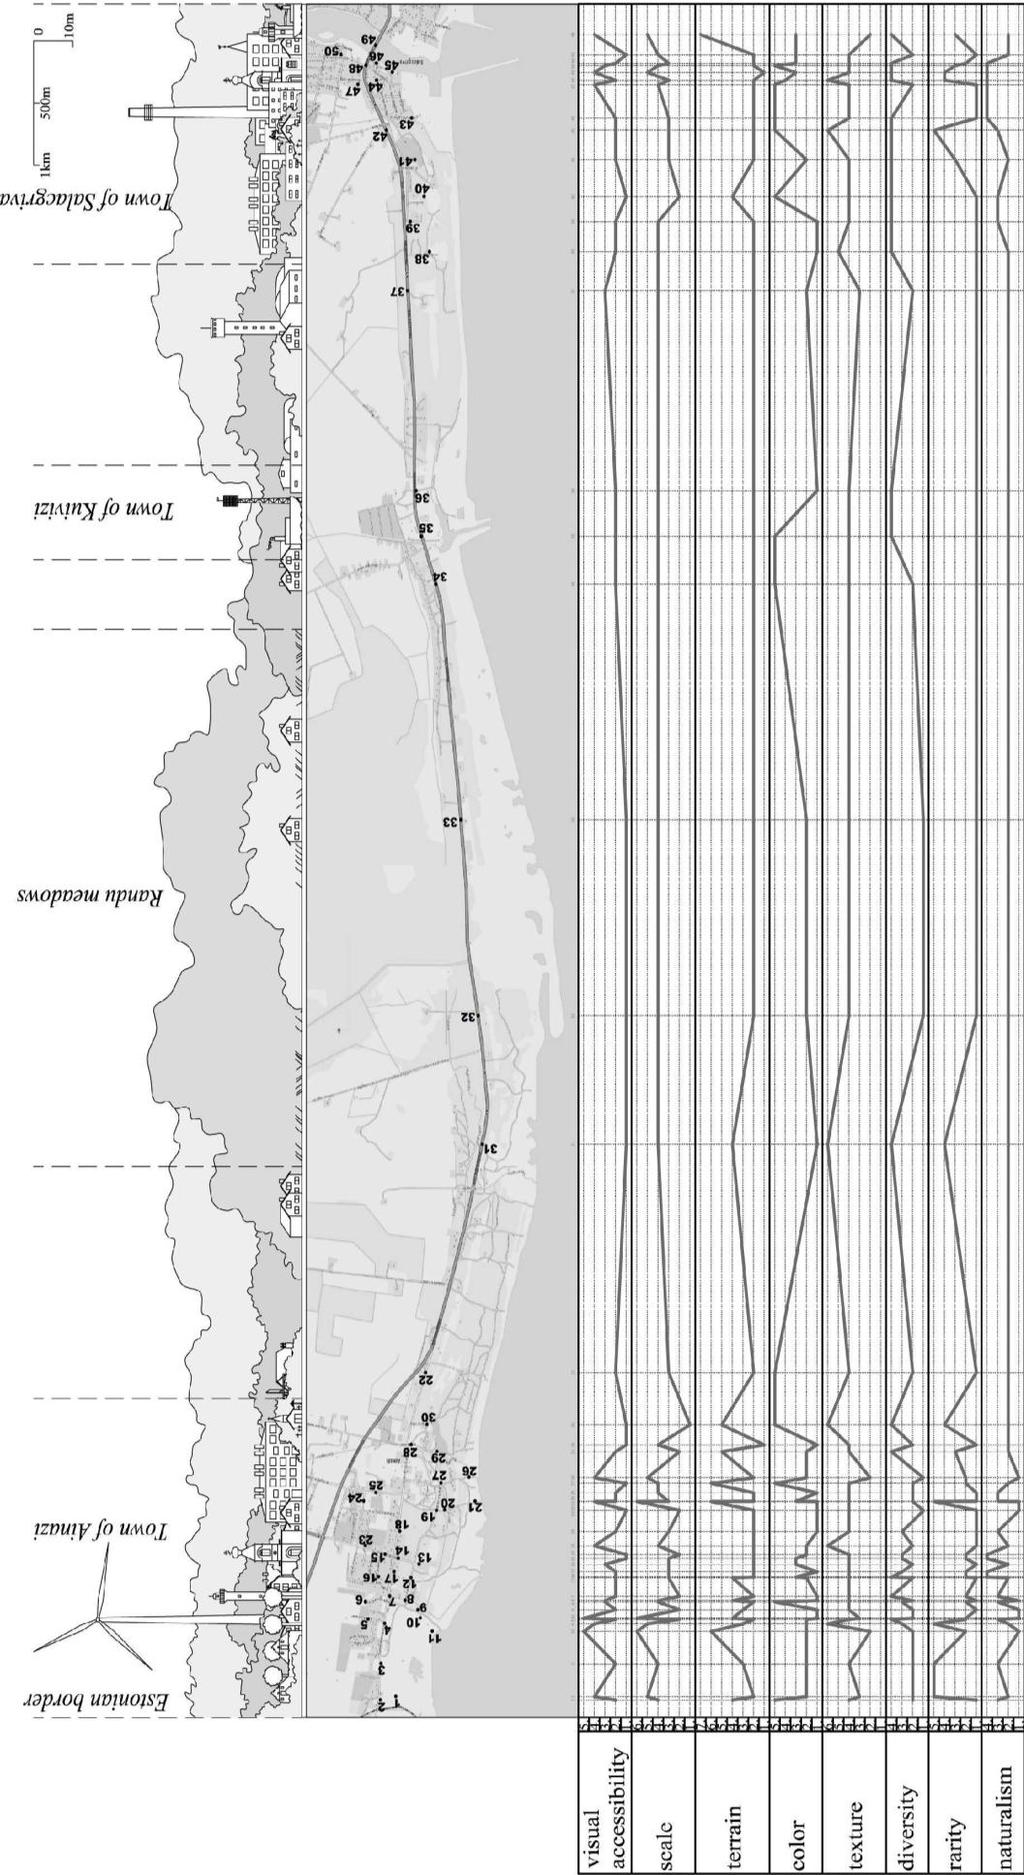 Fig. 4. The landscape visual spatial curve.